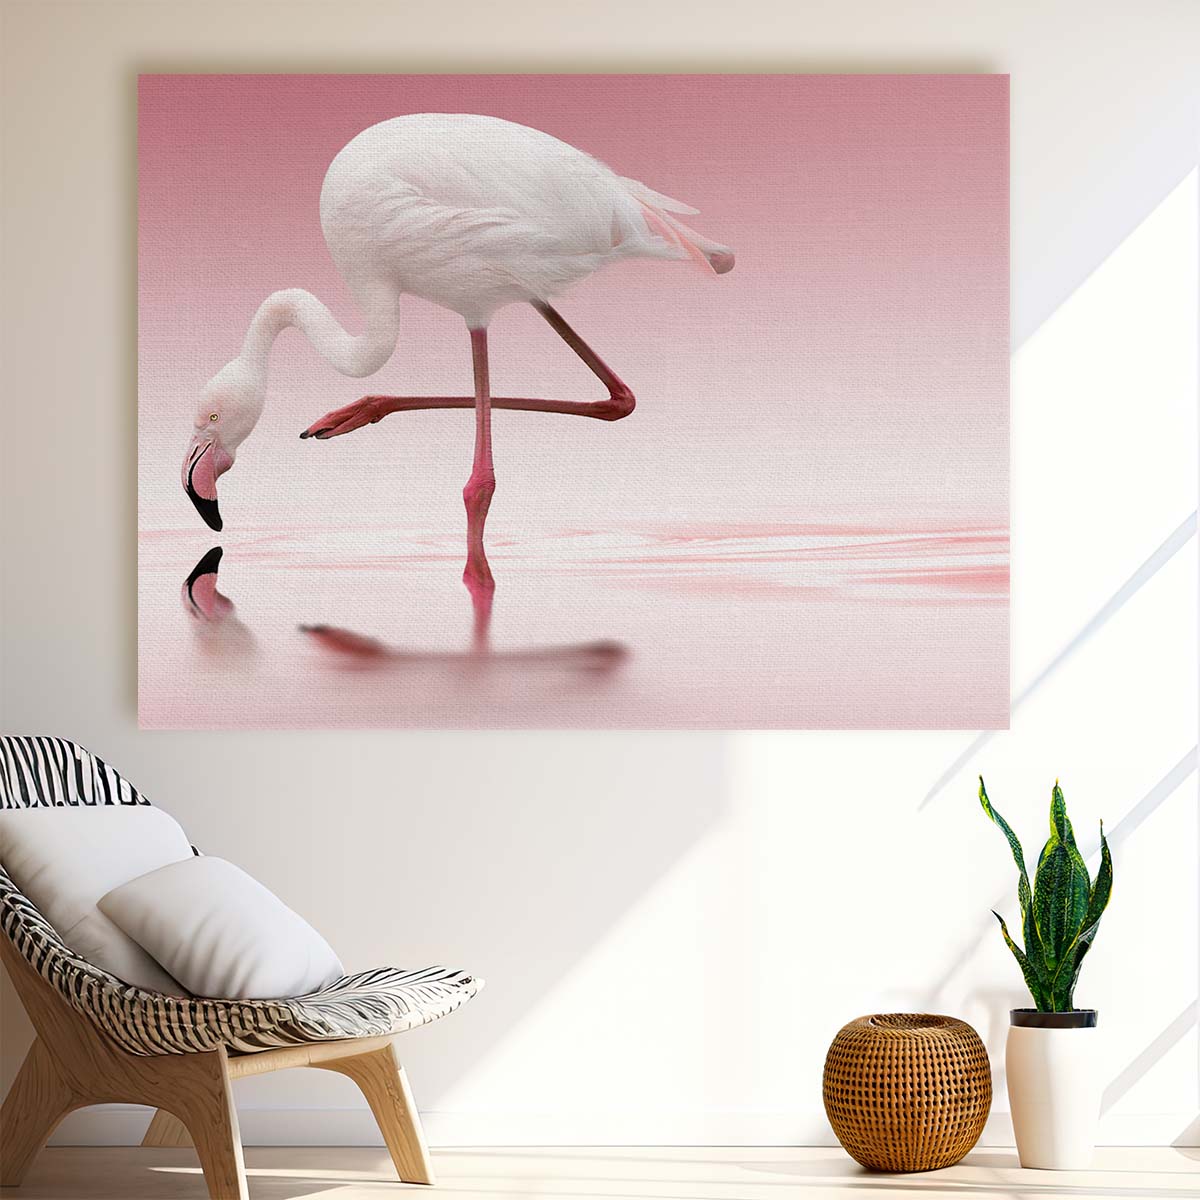 Romantic Pink Flamingo Pair Reflection Wall Art by Luxuriance Designs. Made in USA.